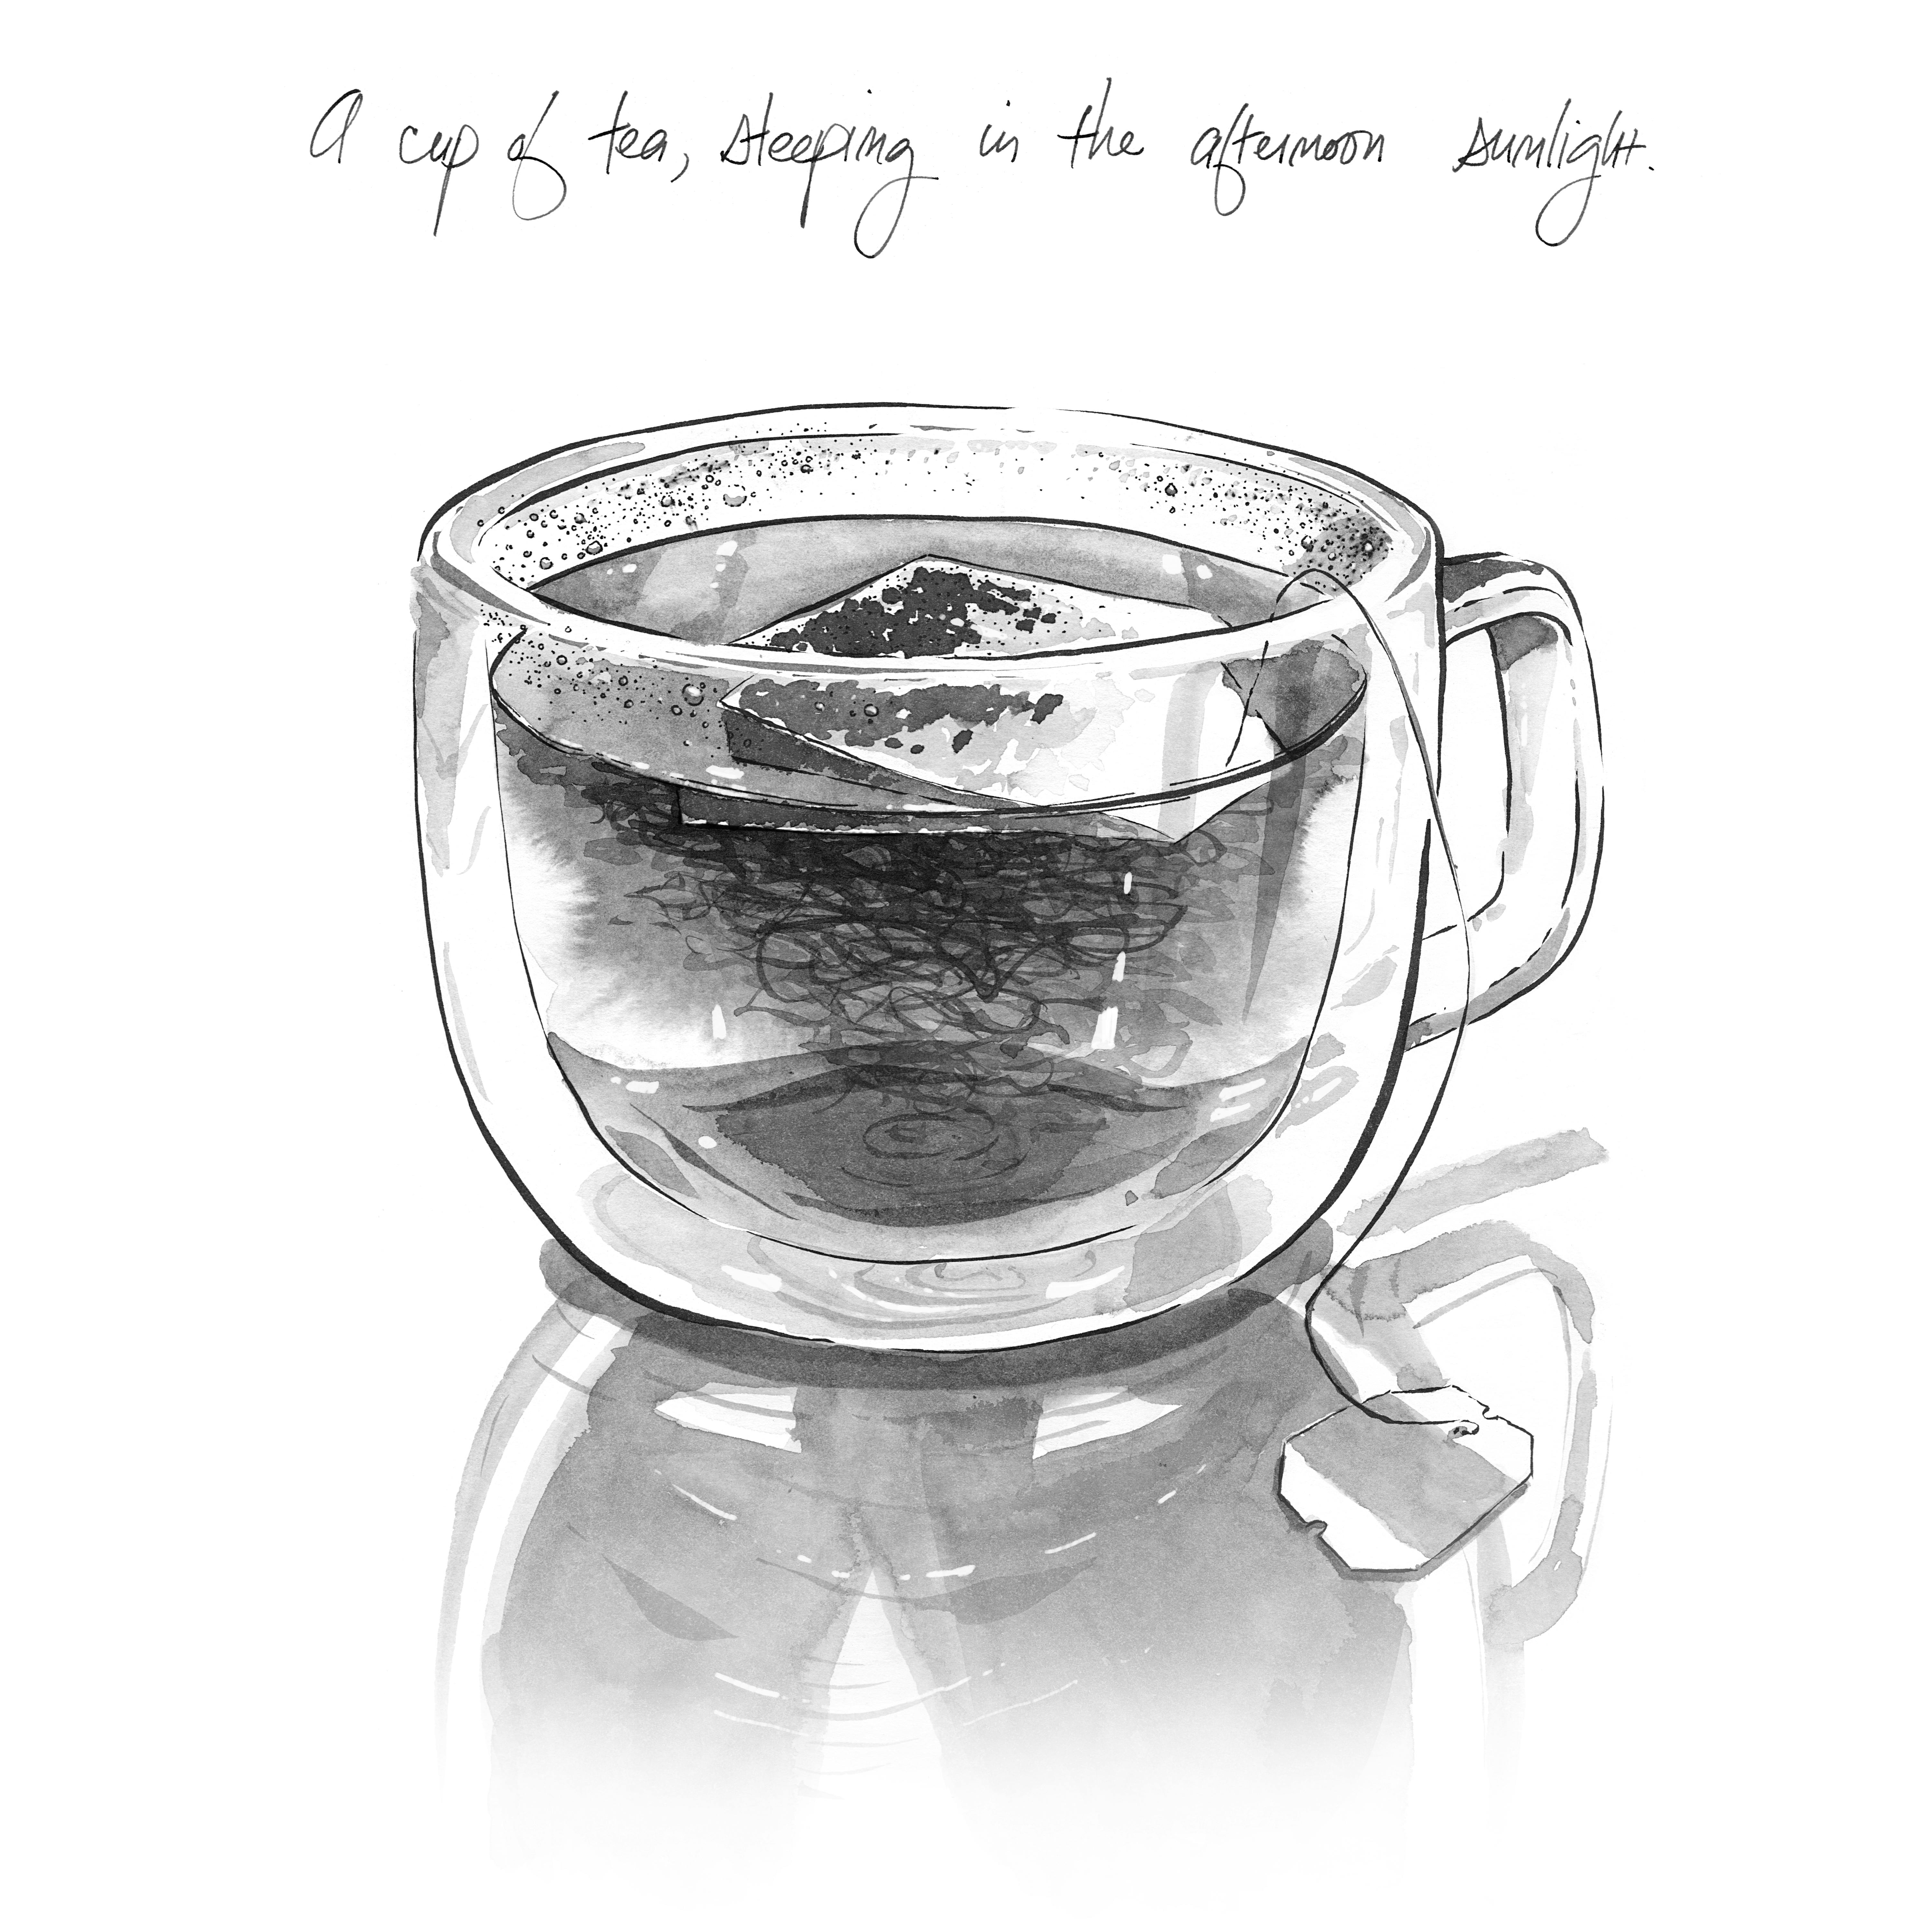 Ink wash drawing of a cup of tea, steeping in the afternoon sunlight.